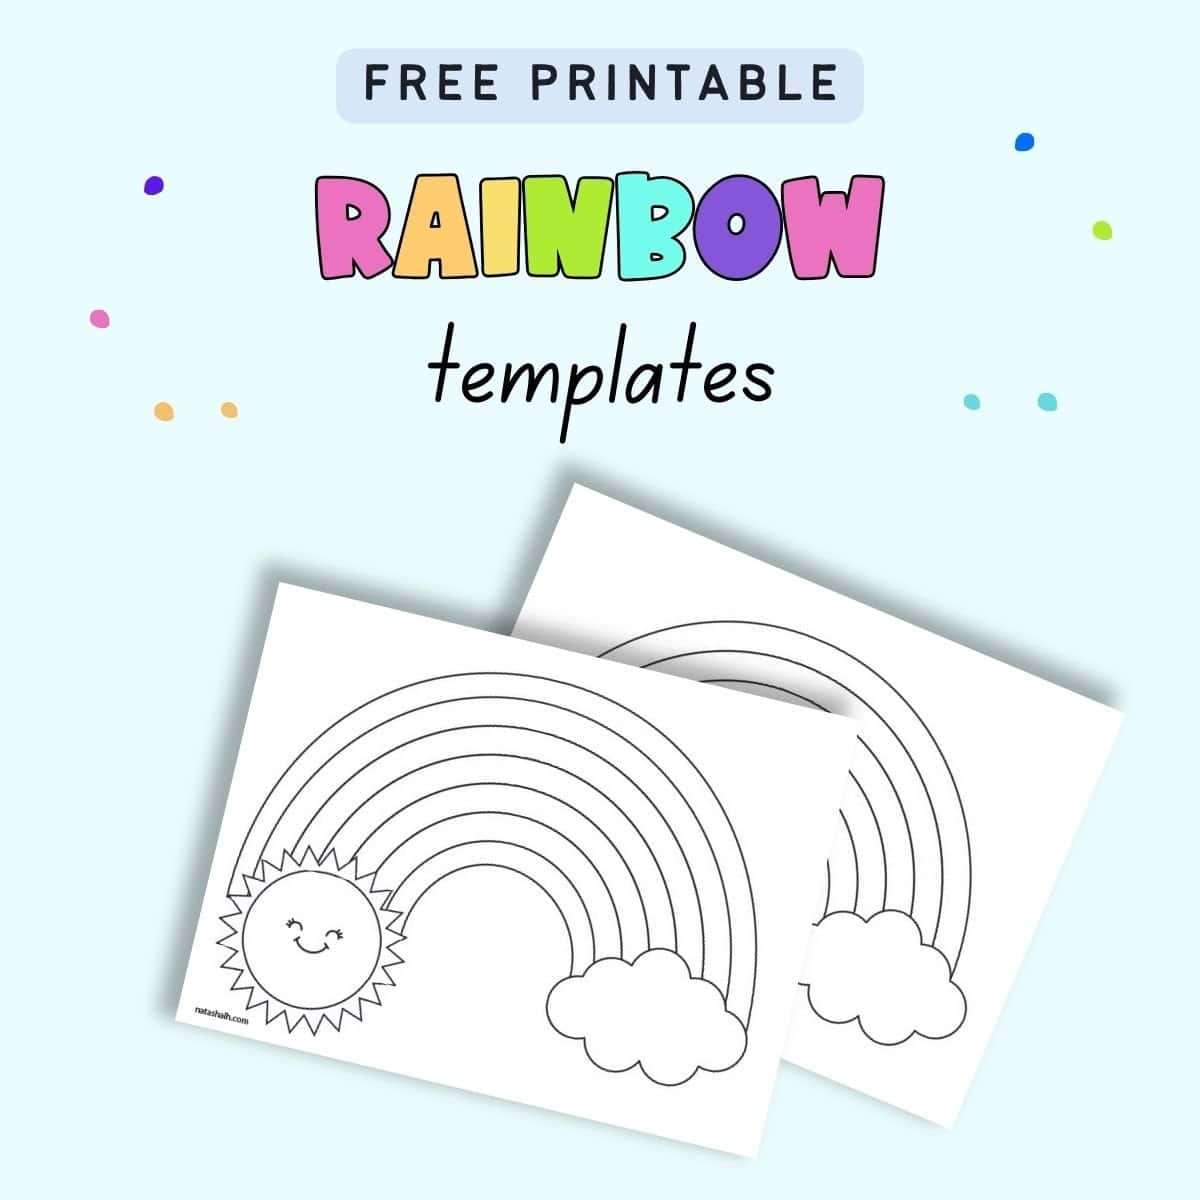 Text "free printable rainbow templates" with a peview of two rainbow with clouds templates